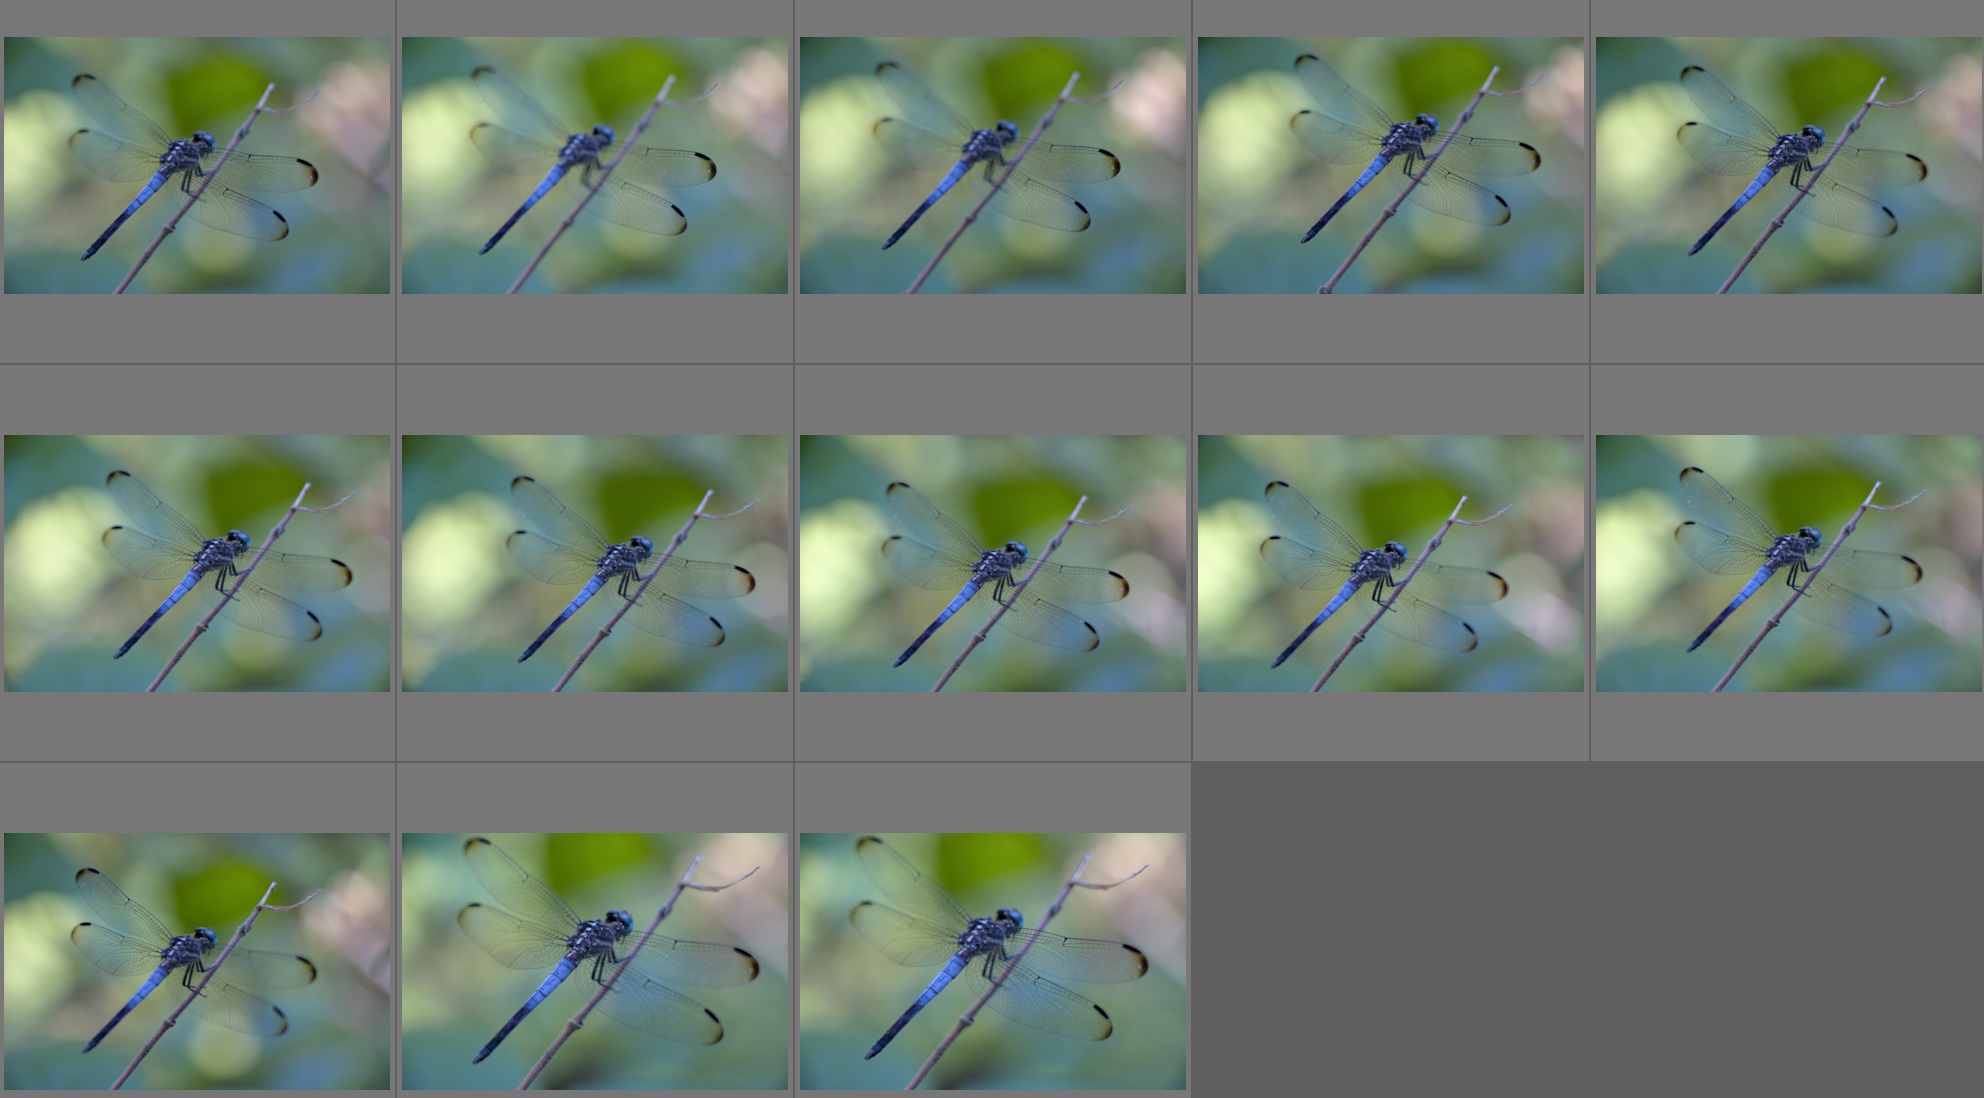 A screenshot with 13 similar images of a blue dragonfly.